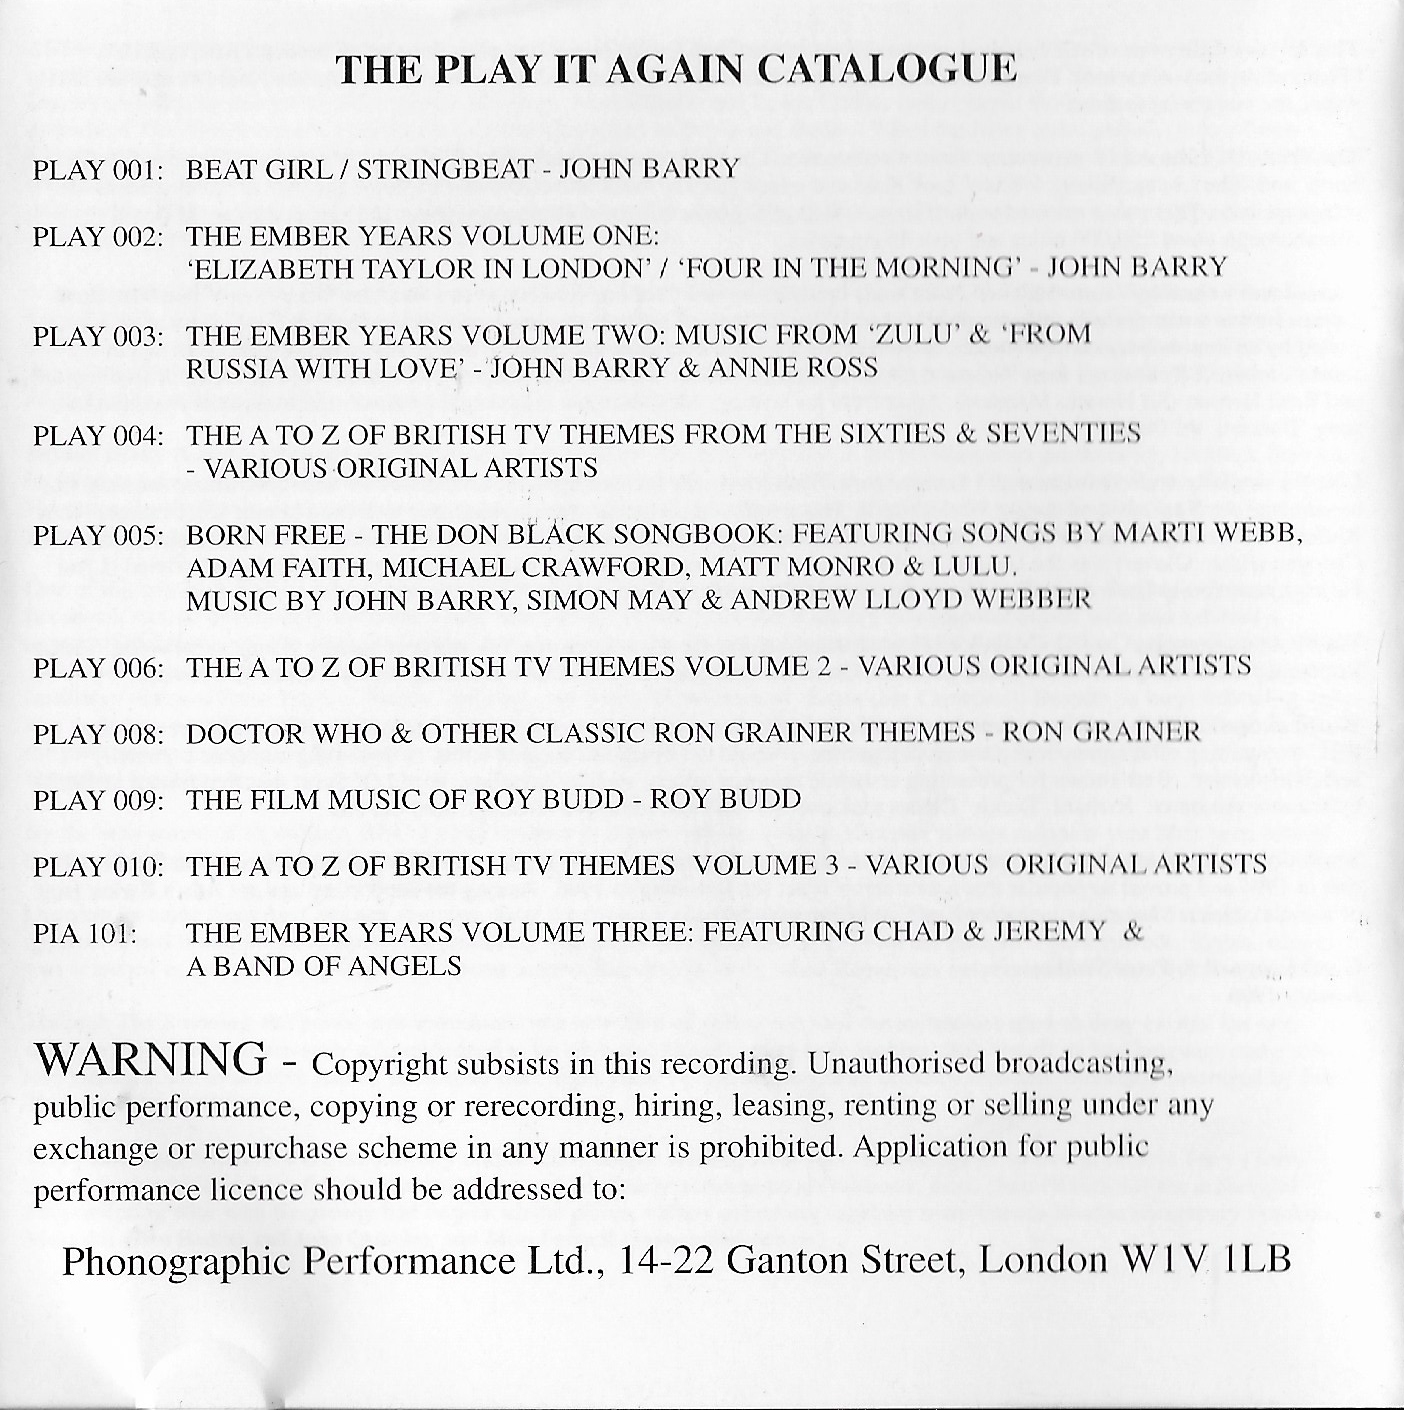 Middle of cover of PLAY 010